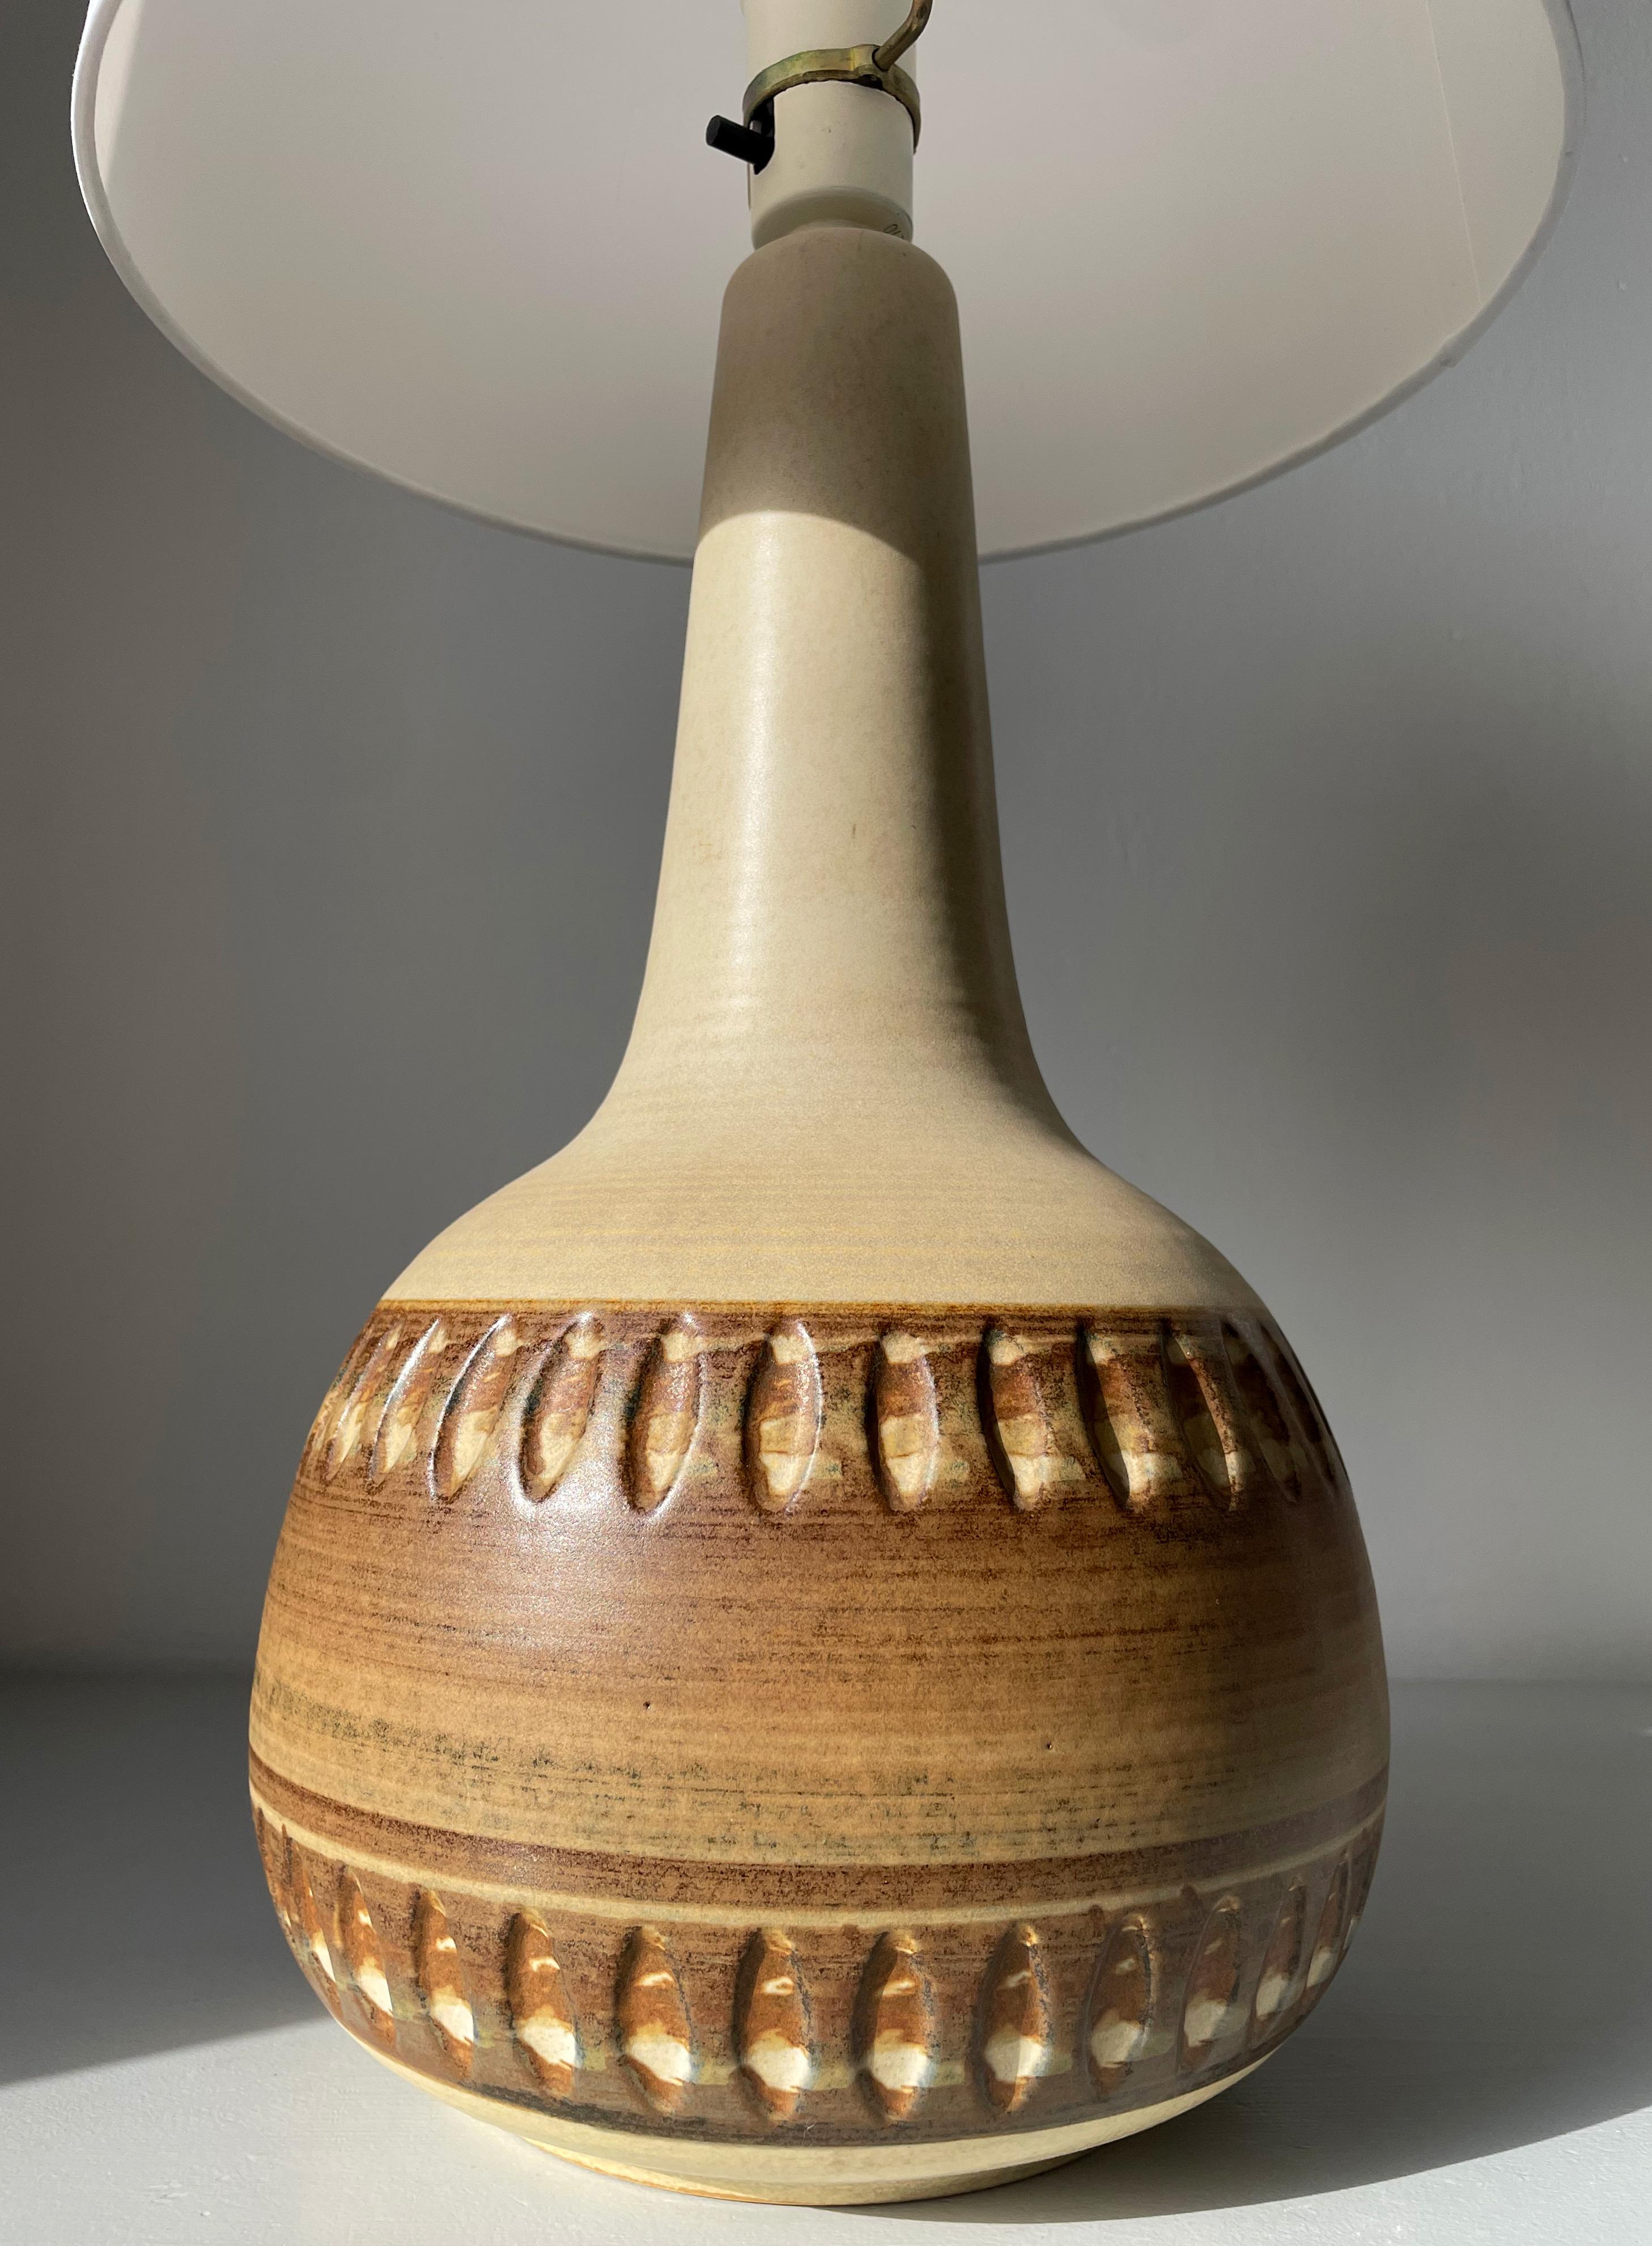 Tall 1960s Danish Modern Earth Toned Stoneware Søholm Lamp For Sale 1